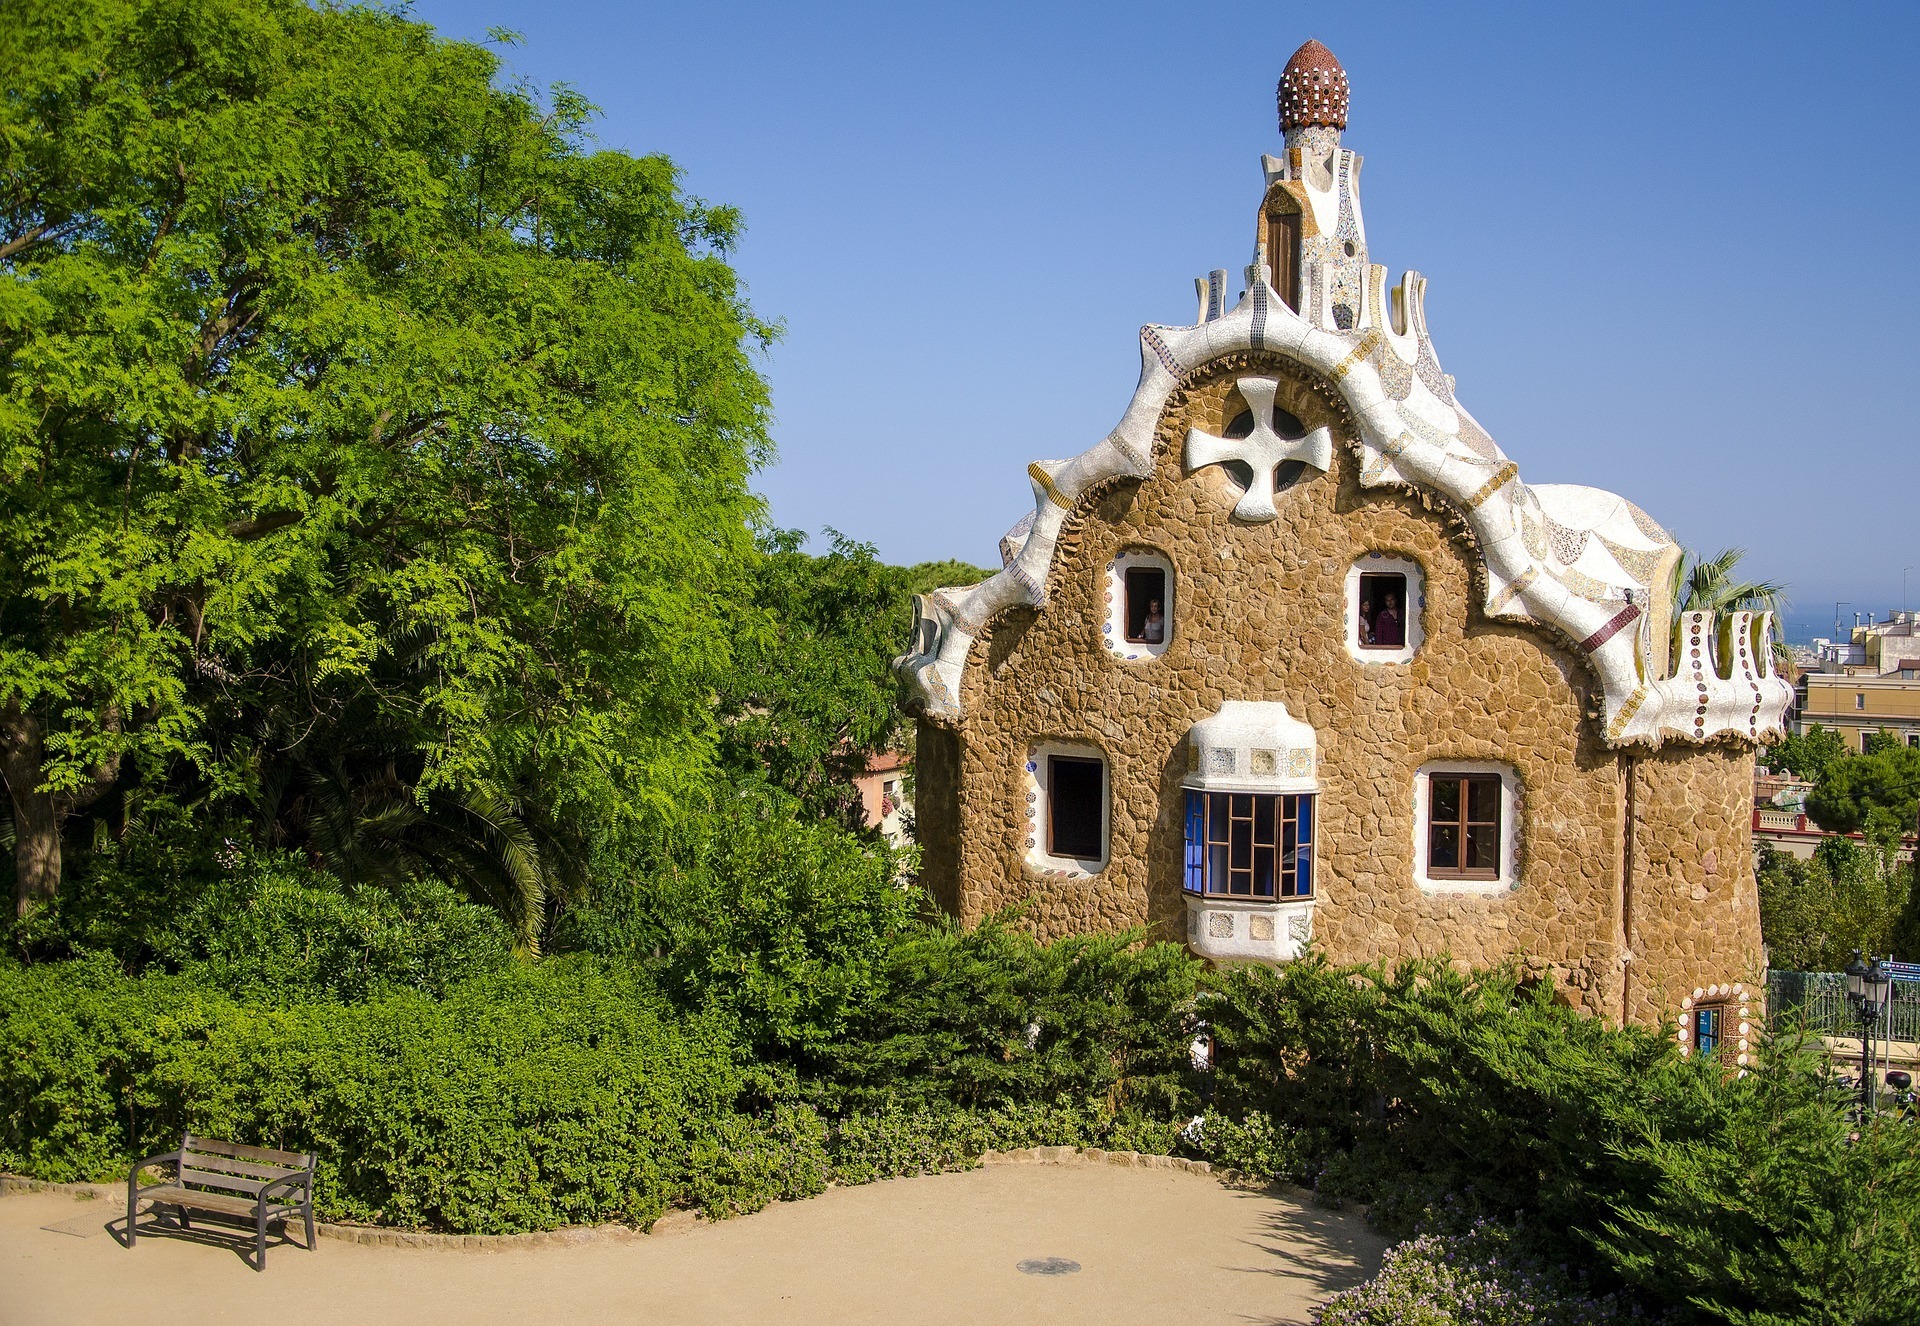 Visiting Barcelona: 5 Places Not to Miss - Parque Guell